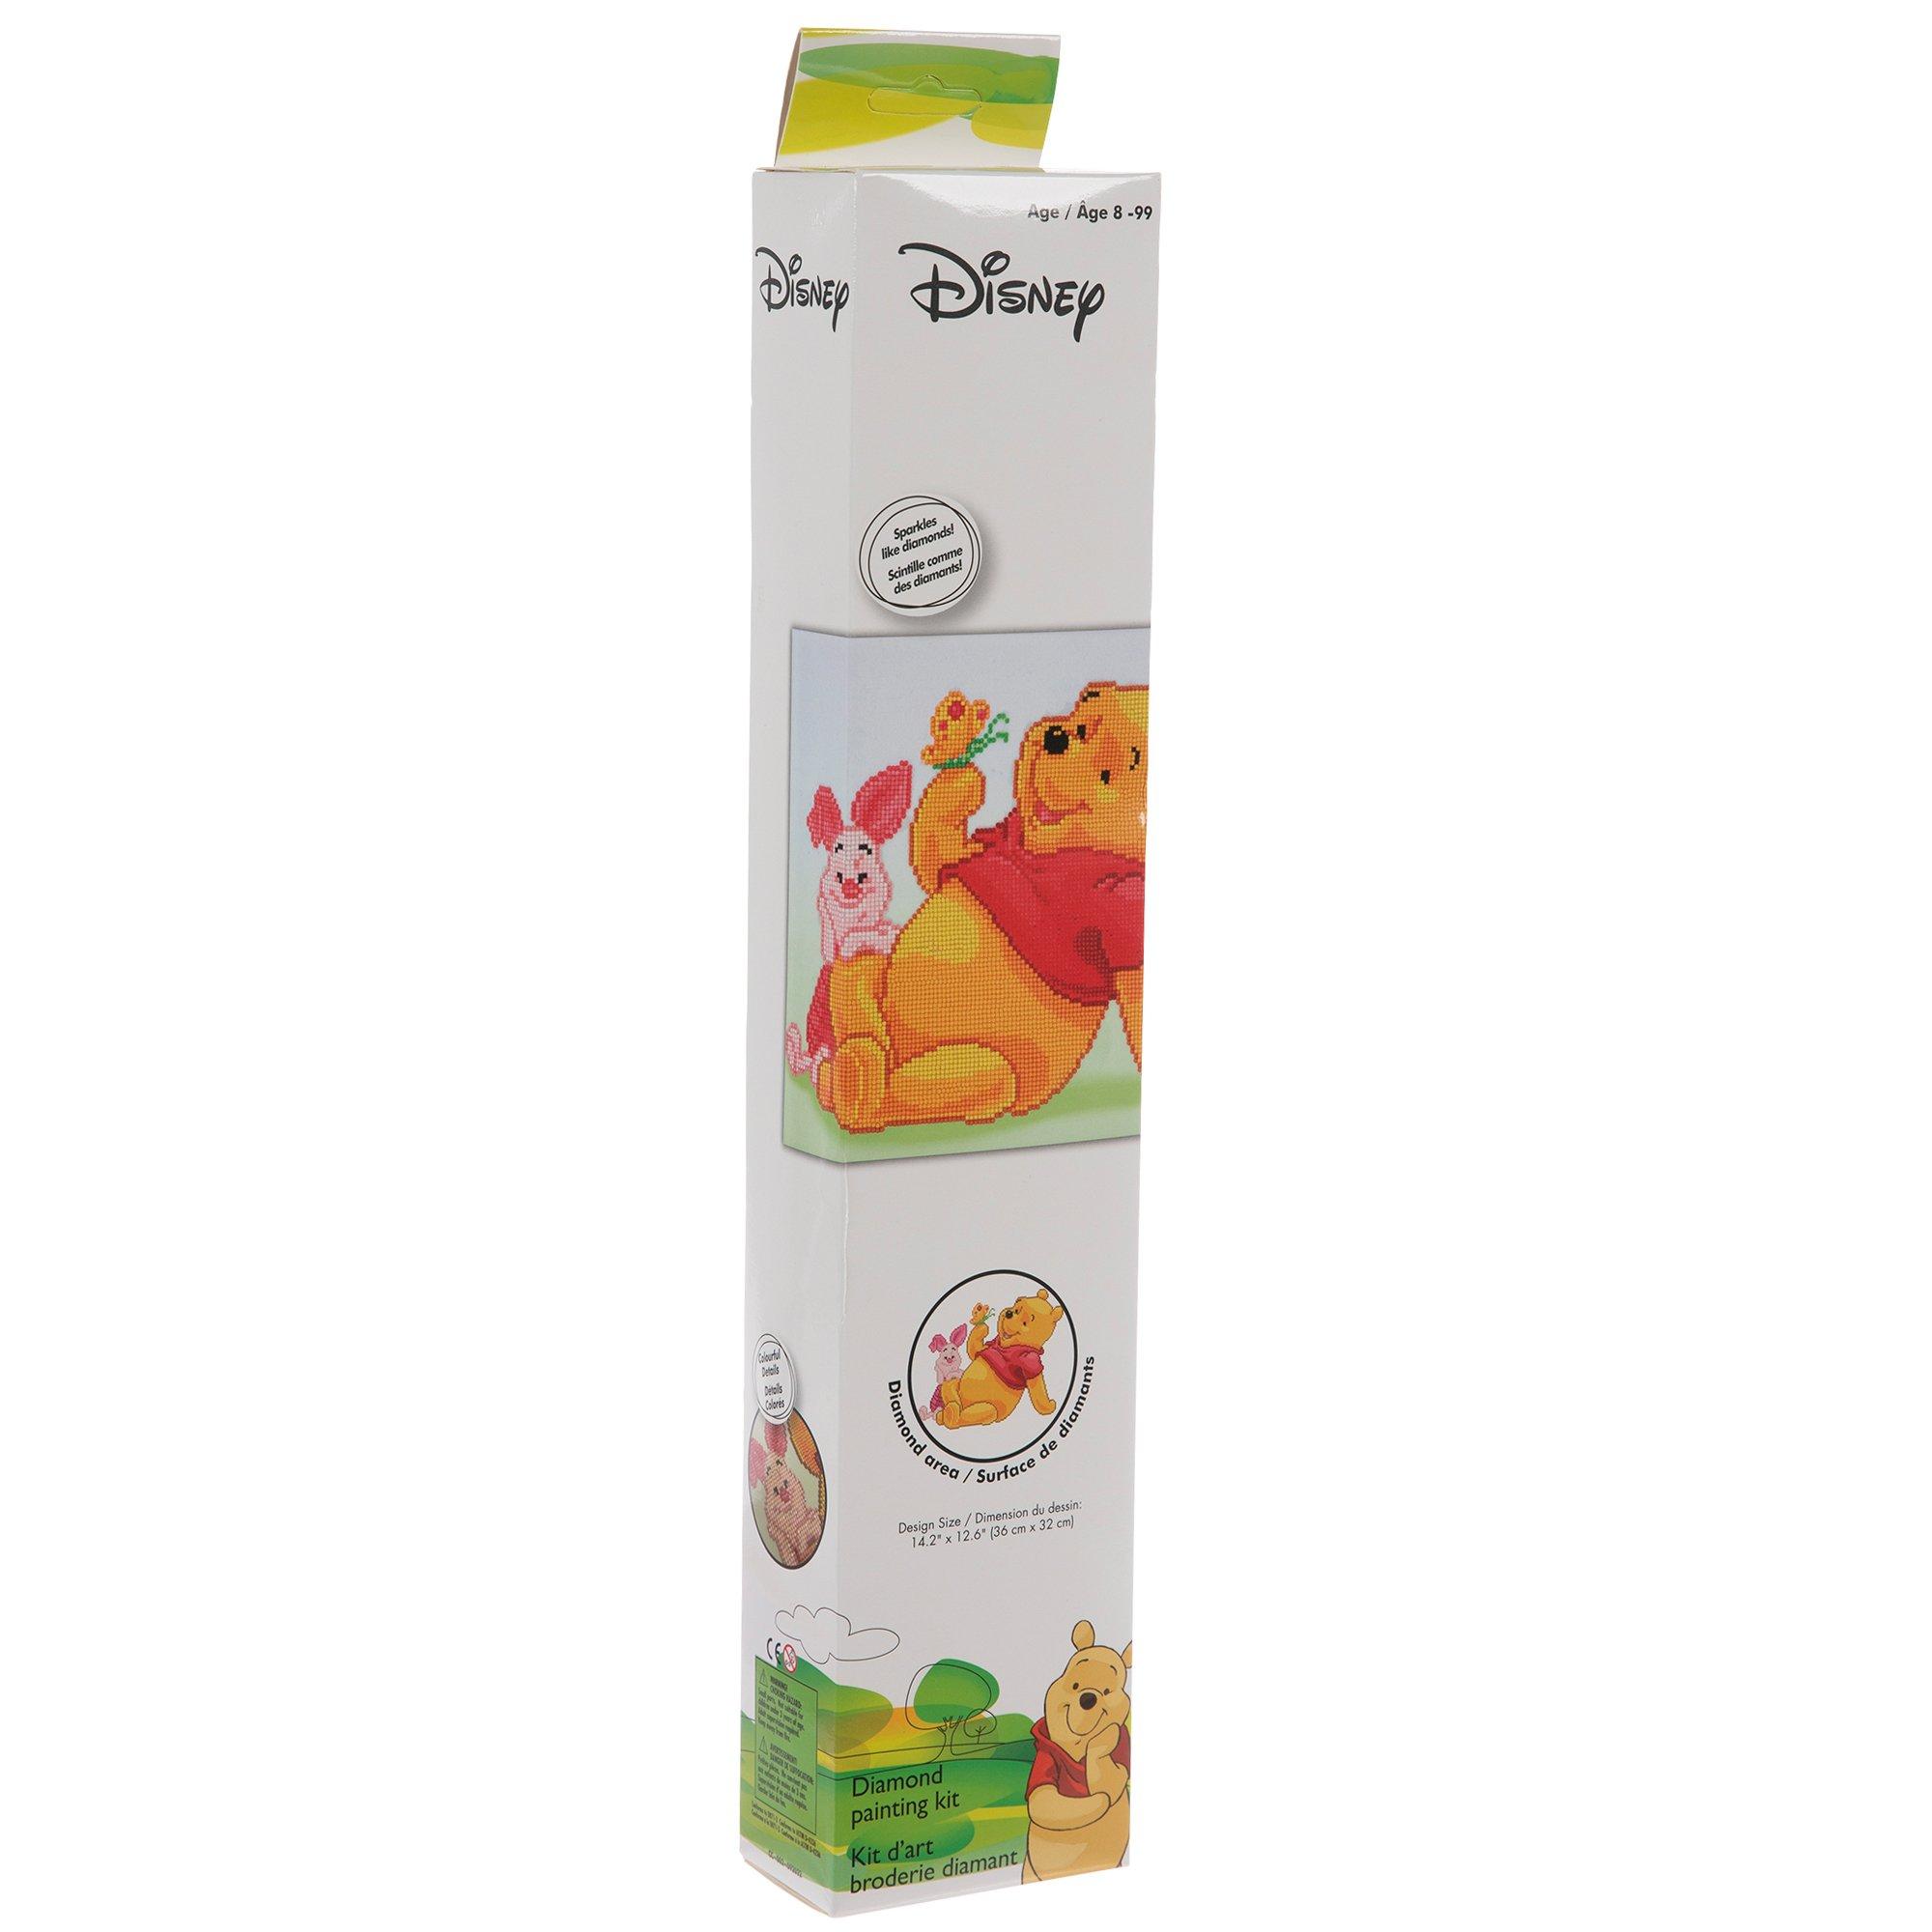 Winnie The Pooh Crystal Rhinestone Diamond Painting Kits With/ Without